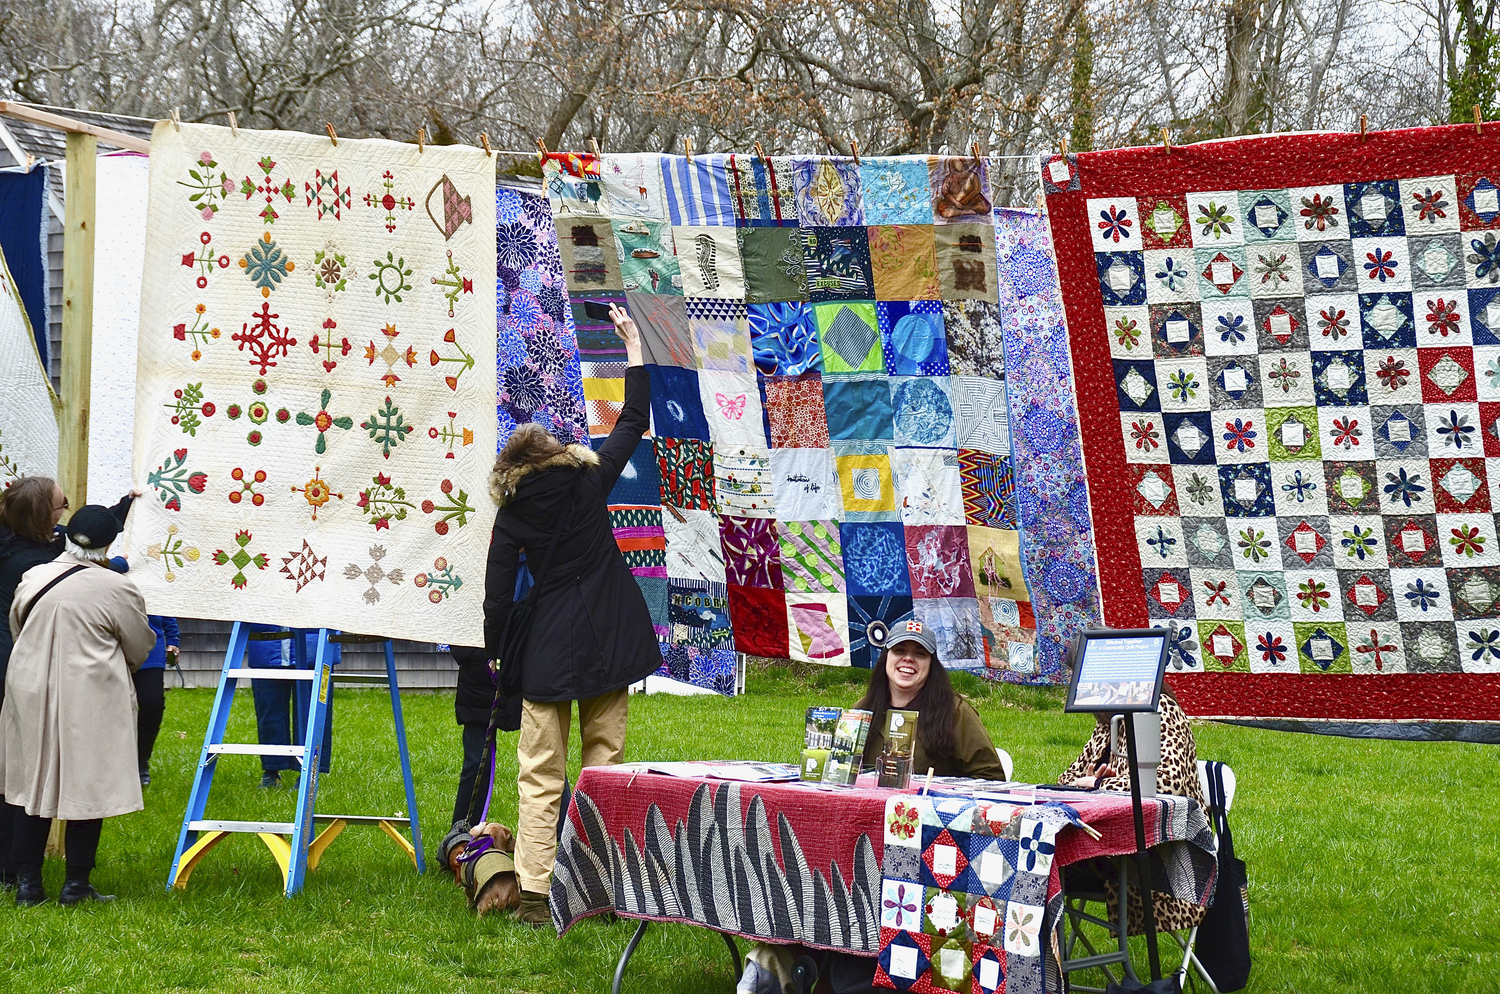 The Arts Center at Duck Creek in Springs hosted the Airing of Quilts on Saturday. The event was organized by Louise Eastman and Erica-Lynn Huberty and featured. among others, a bedspread made by Stella Mae McClure Pollock, crafted from Jackson Pollock’s clothing and a quilt by one of Gee’s Bend’s renowned quilters, Leola Pettway.   KYRIL BROMLEY